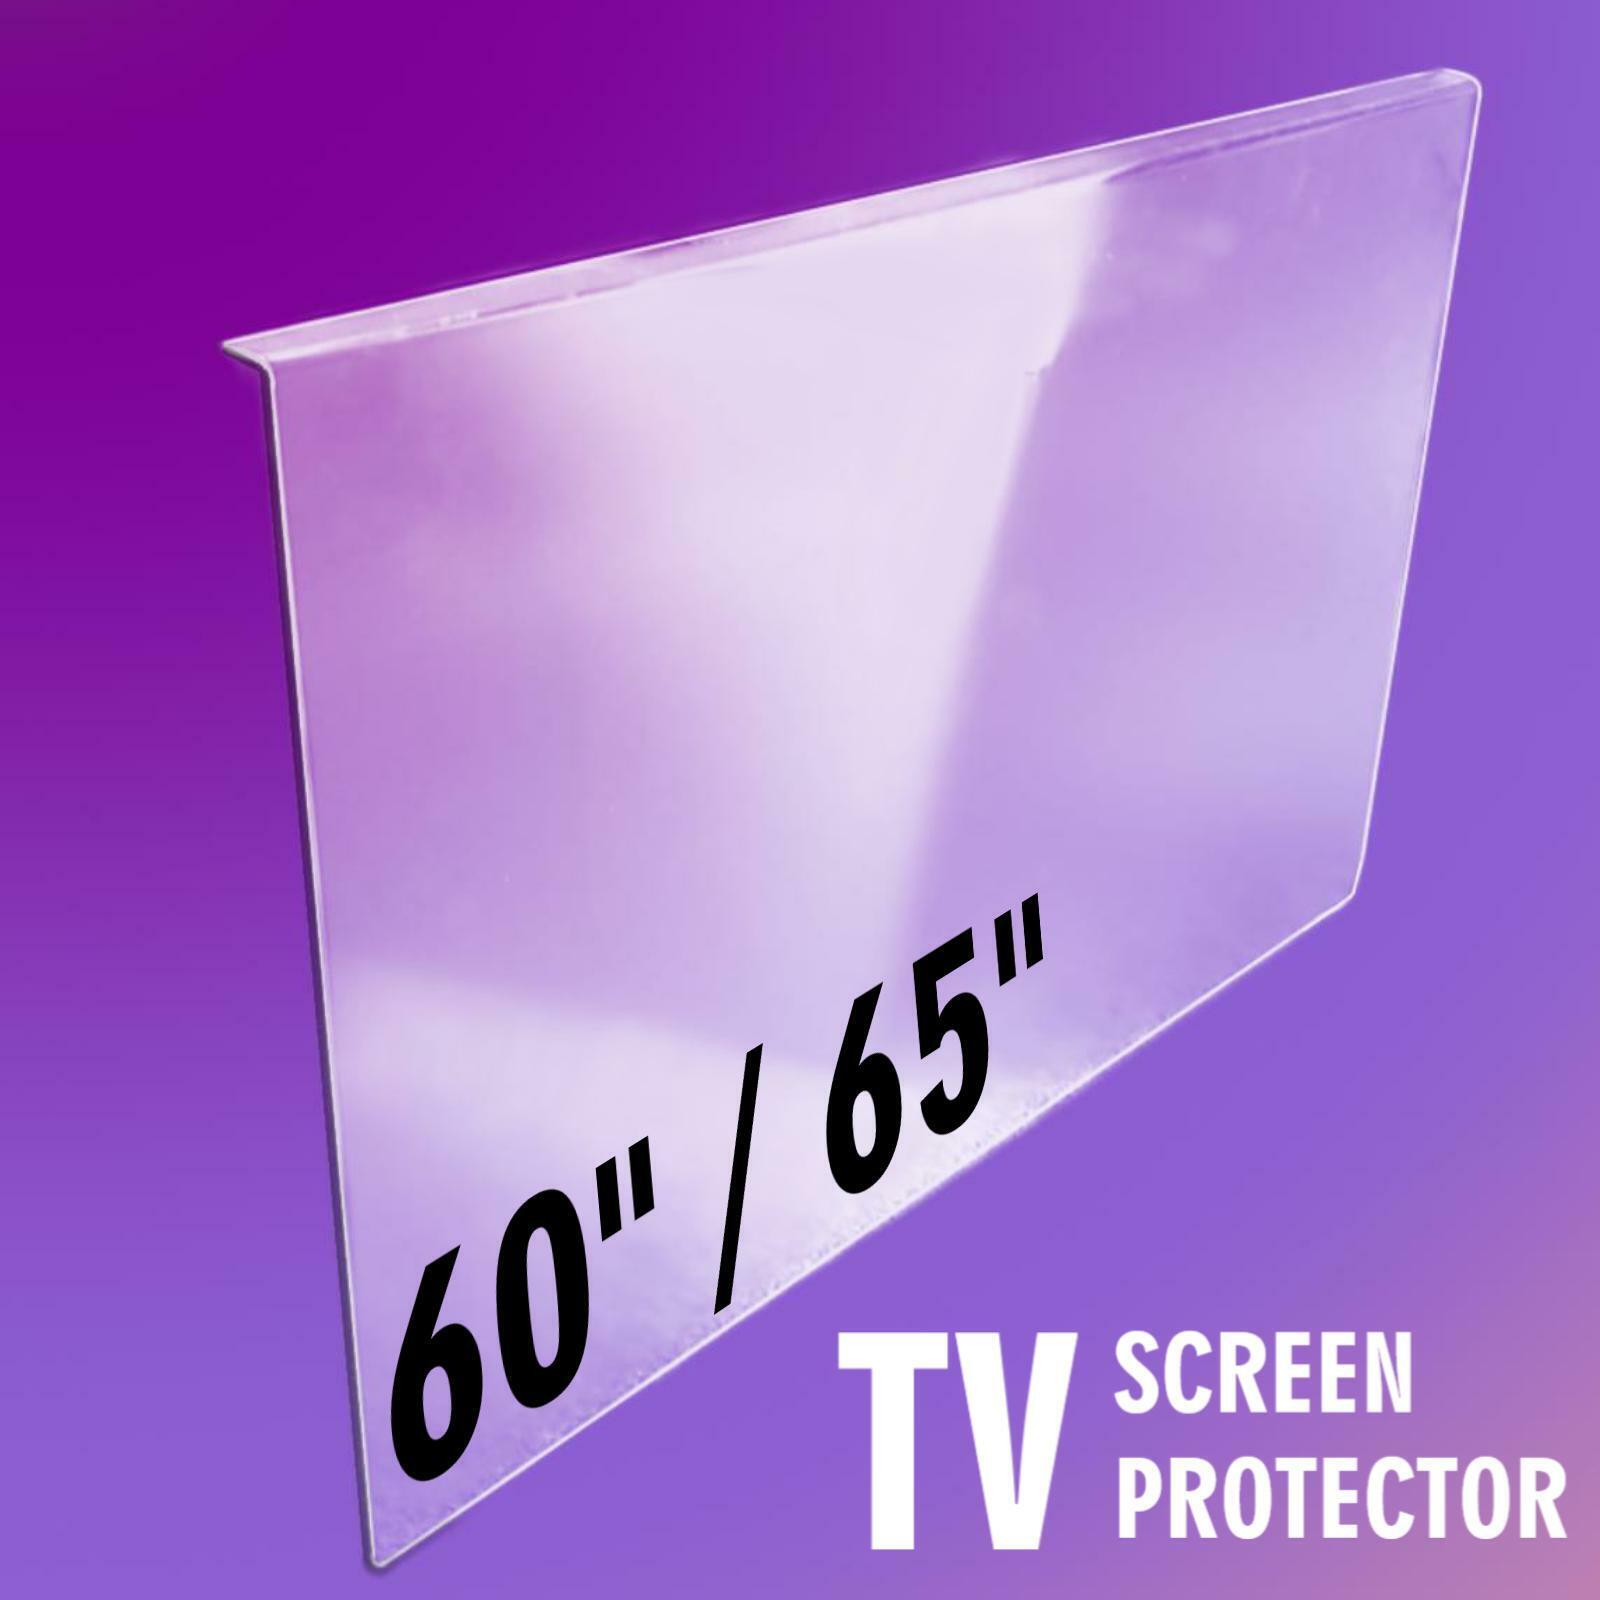 Screen Protector for 65 Inch TV